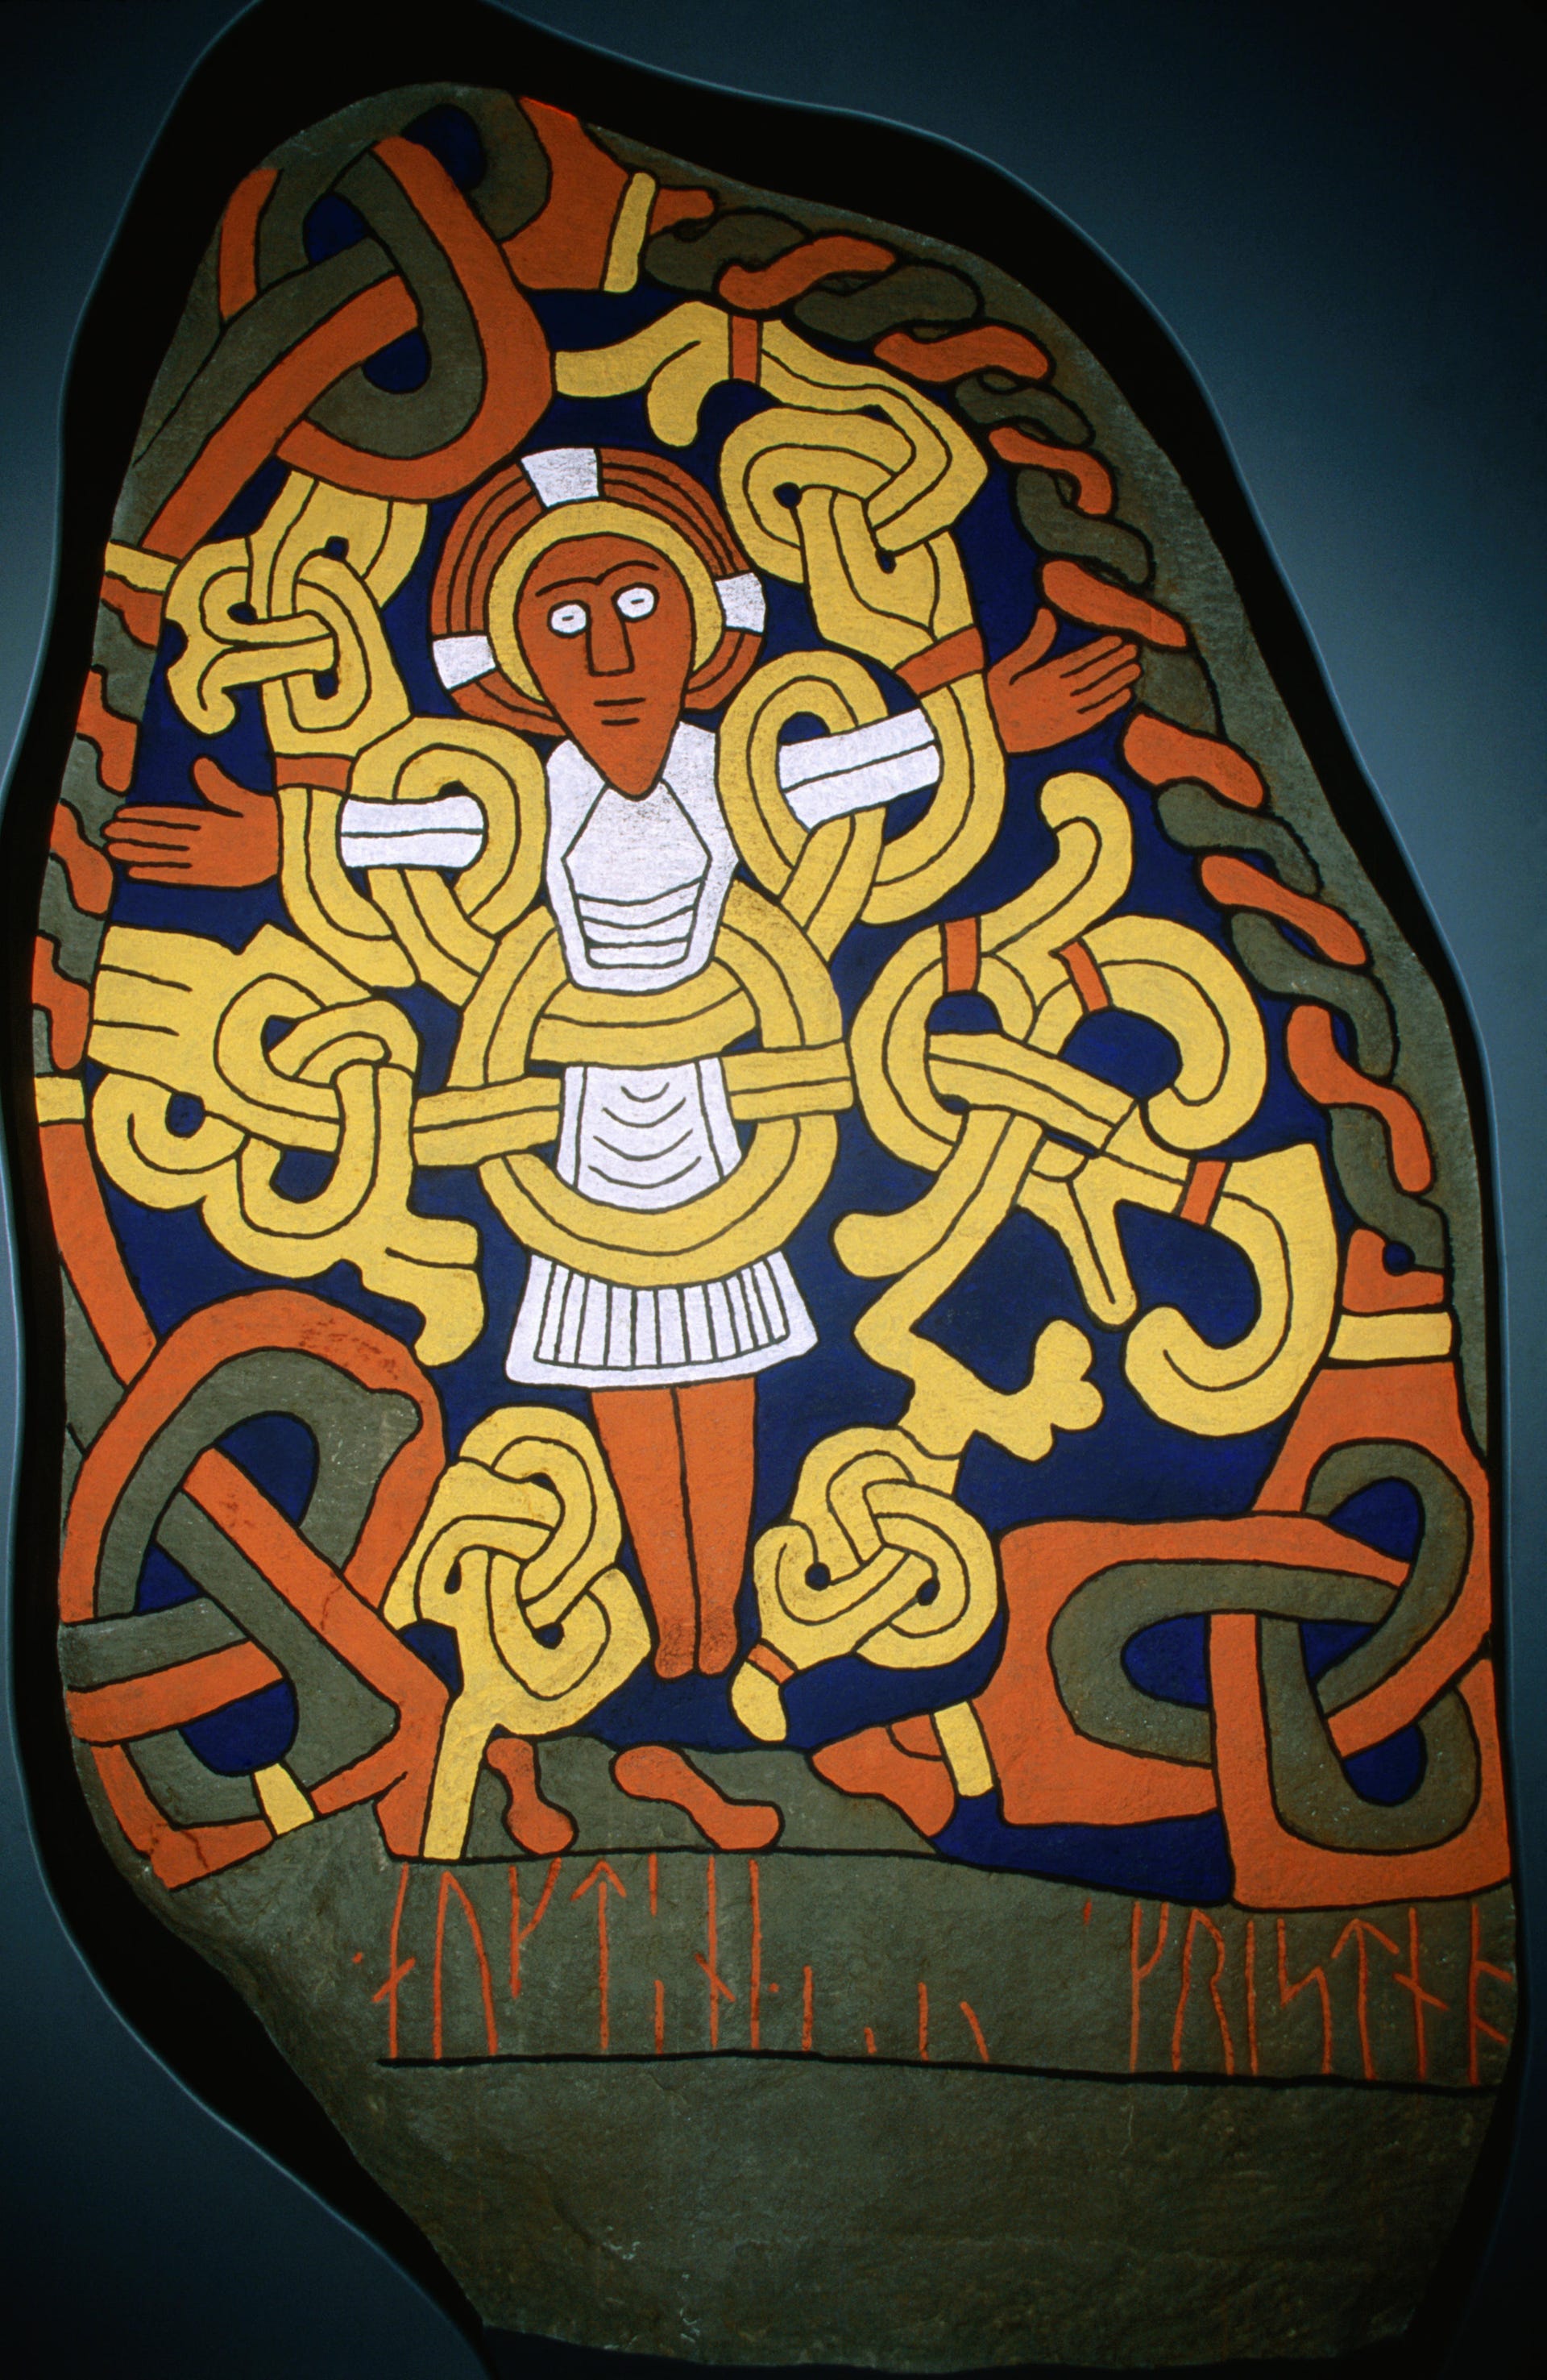 Painted re-construction of old rune stone depicting Viking Harald Bluetooth.